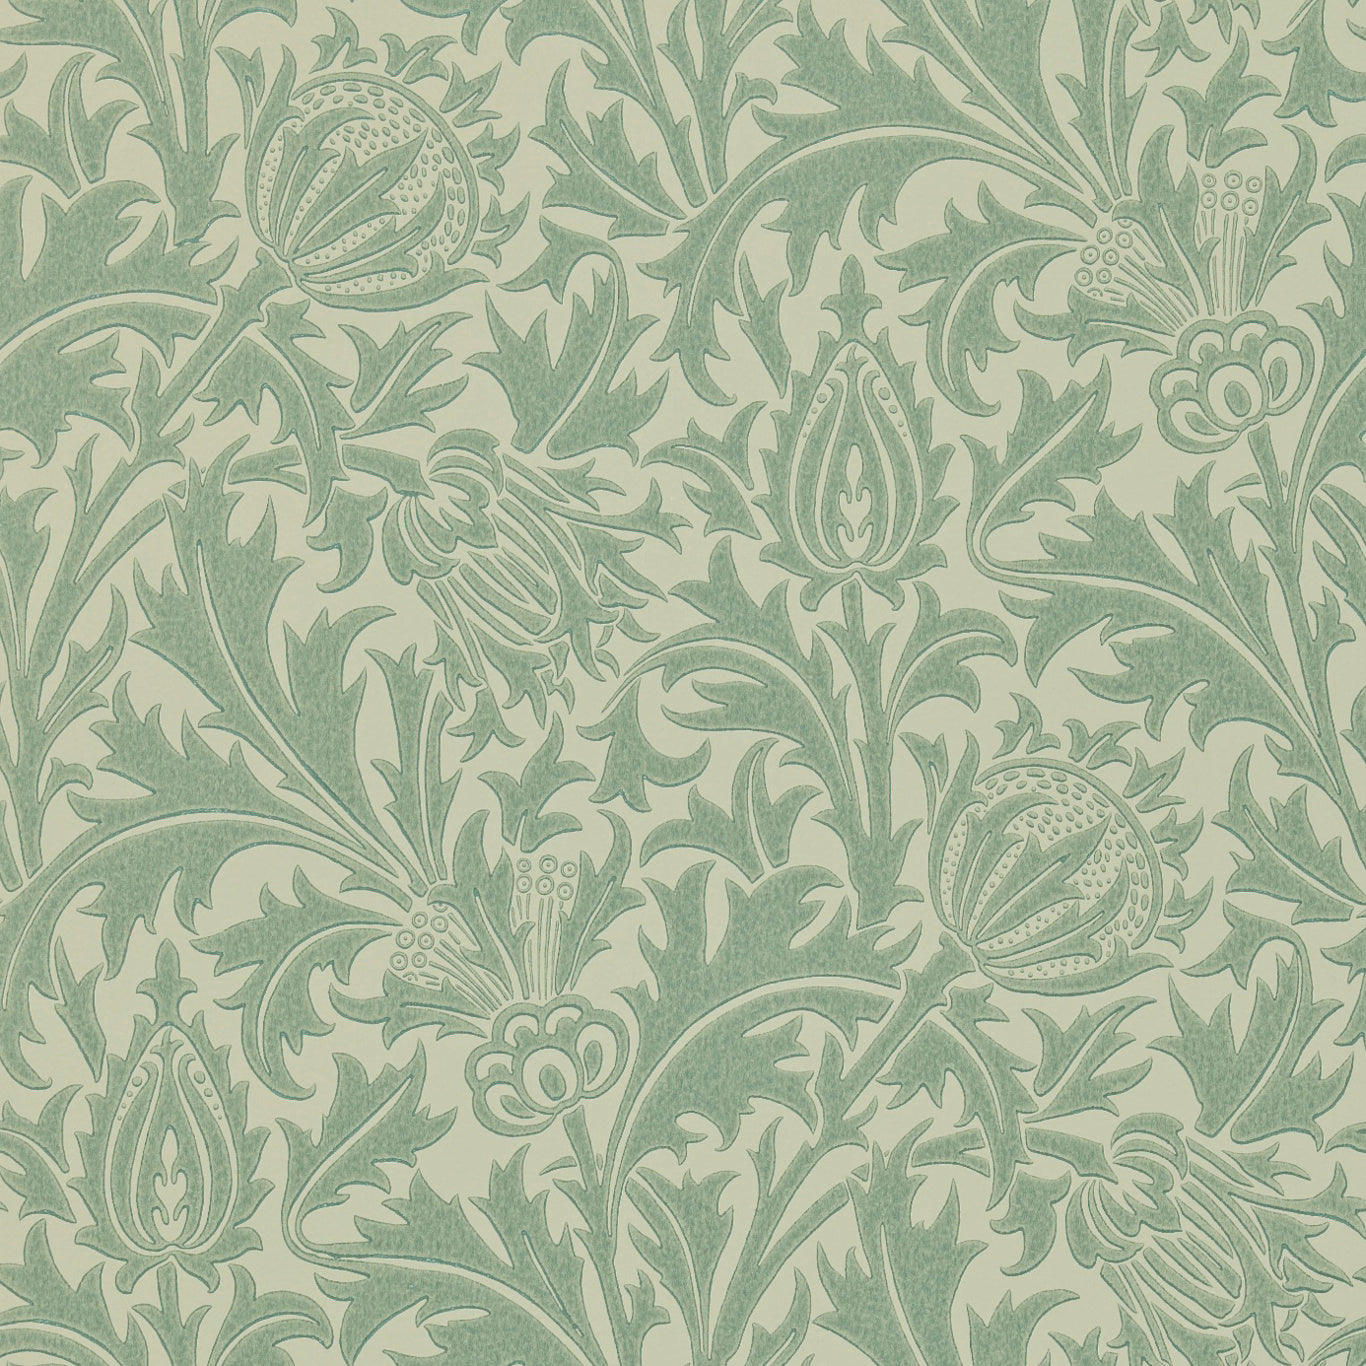 Thistle Wallpaper by Morris & Co